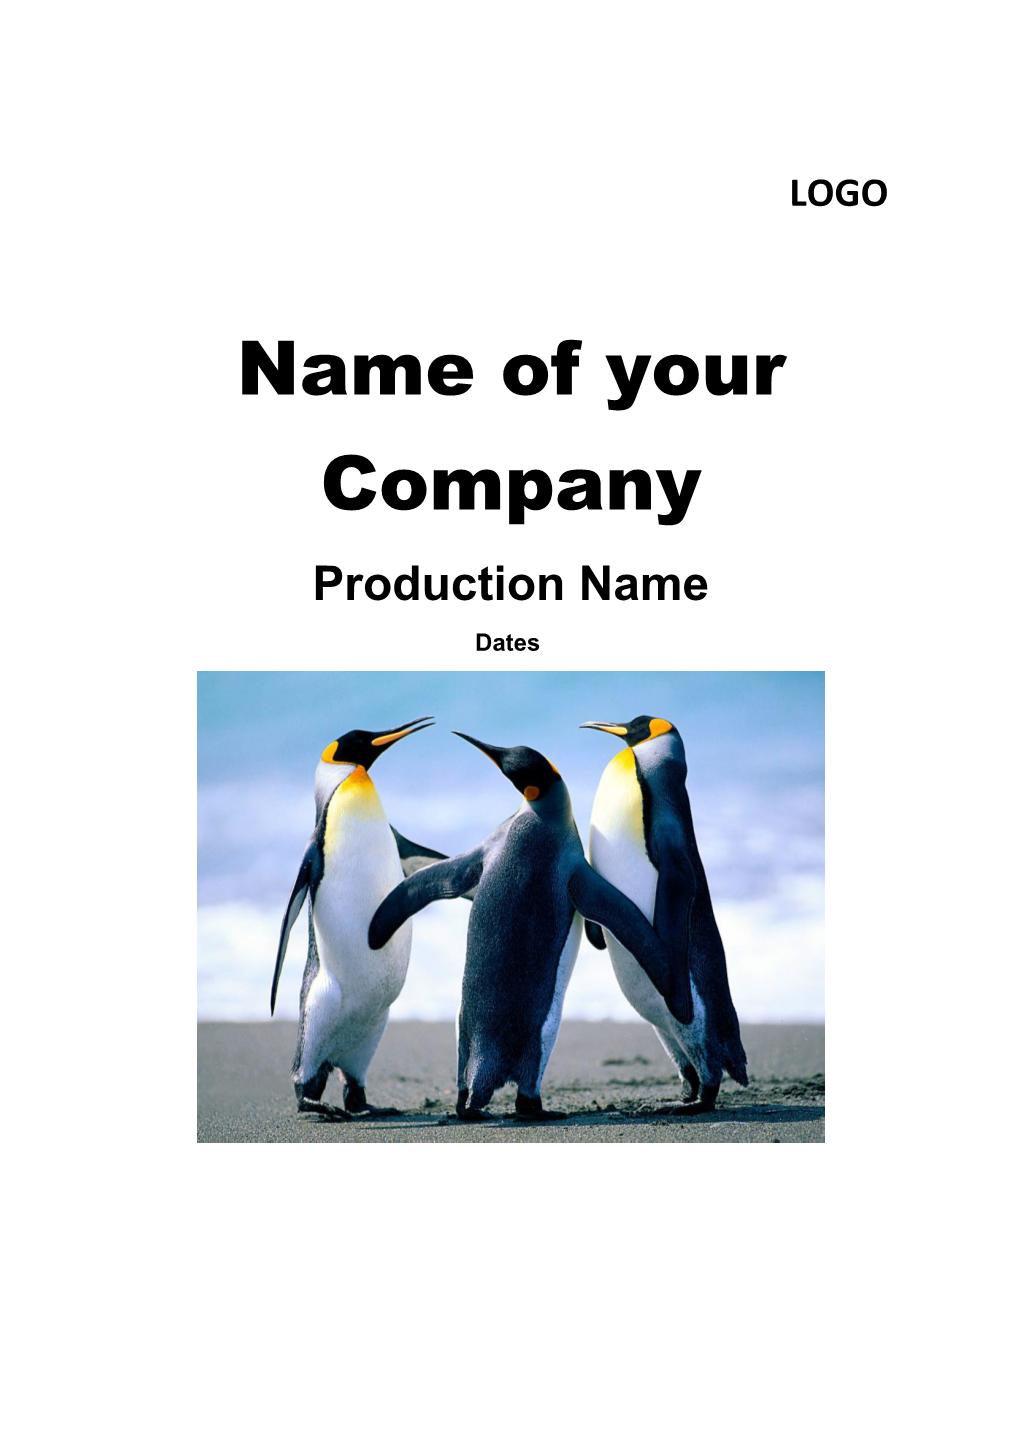 Name of Your Company